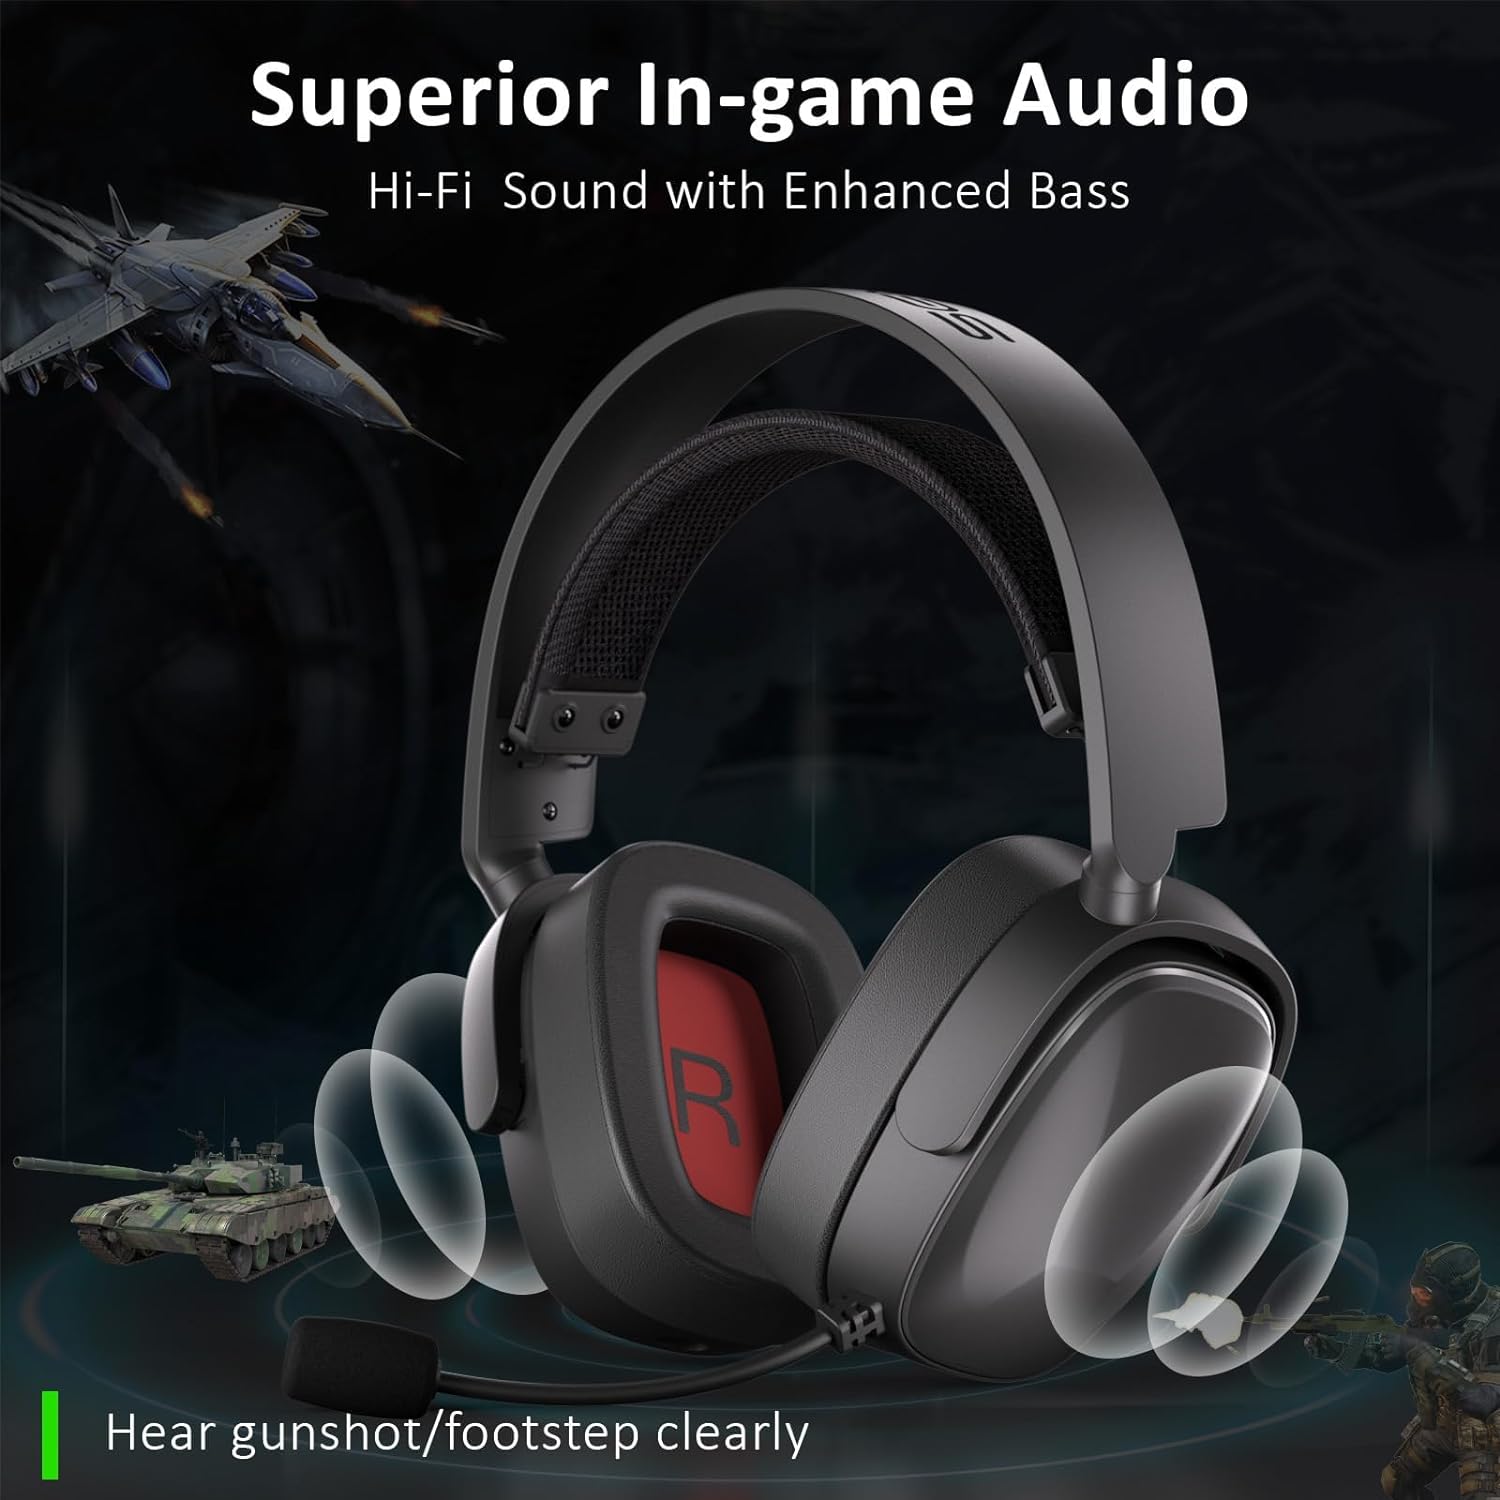 SENZER X100 Wireless Gaming Headset for PS5 PS4 PC Switch Bluetooth Gaming Headphones with Mic - Superior In-Game Sound, Memory Foam Pad Comfort Fit, Interchangeable Cover - w/3.5mm Wired for Xbox One